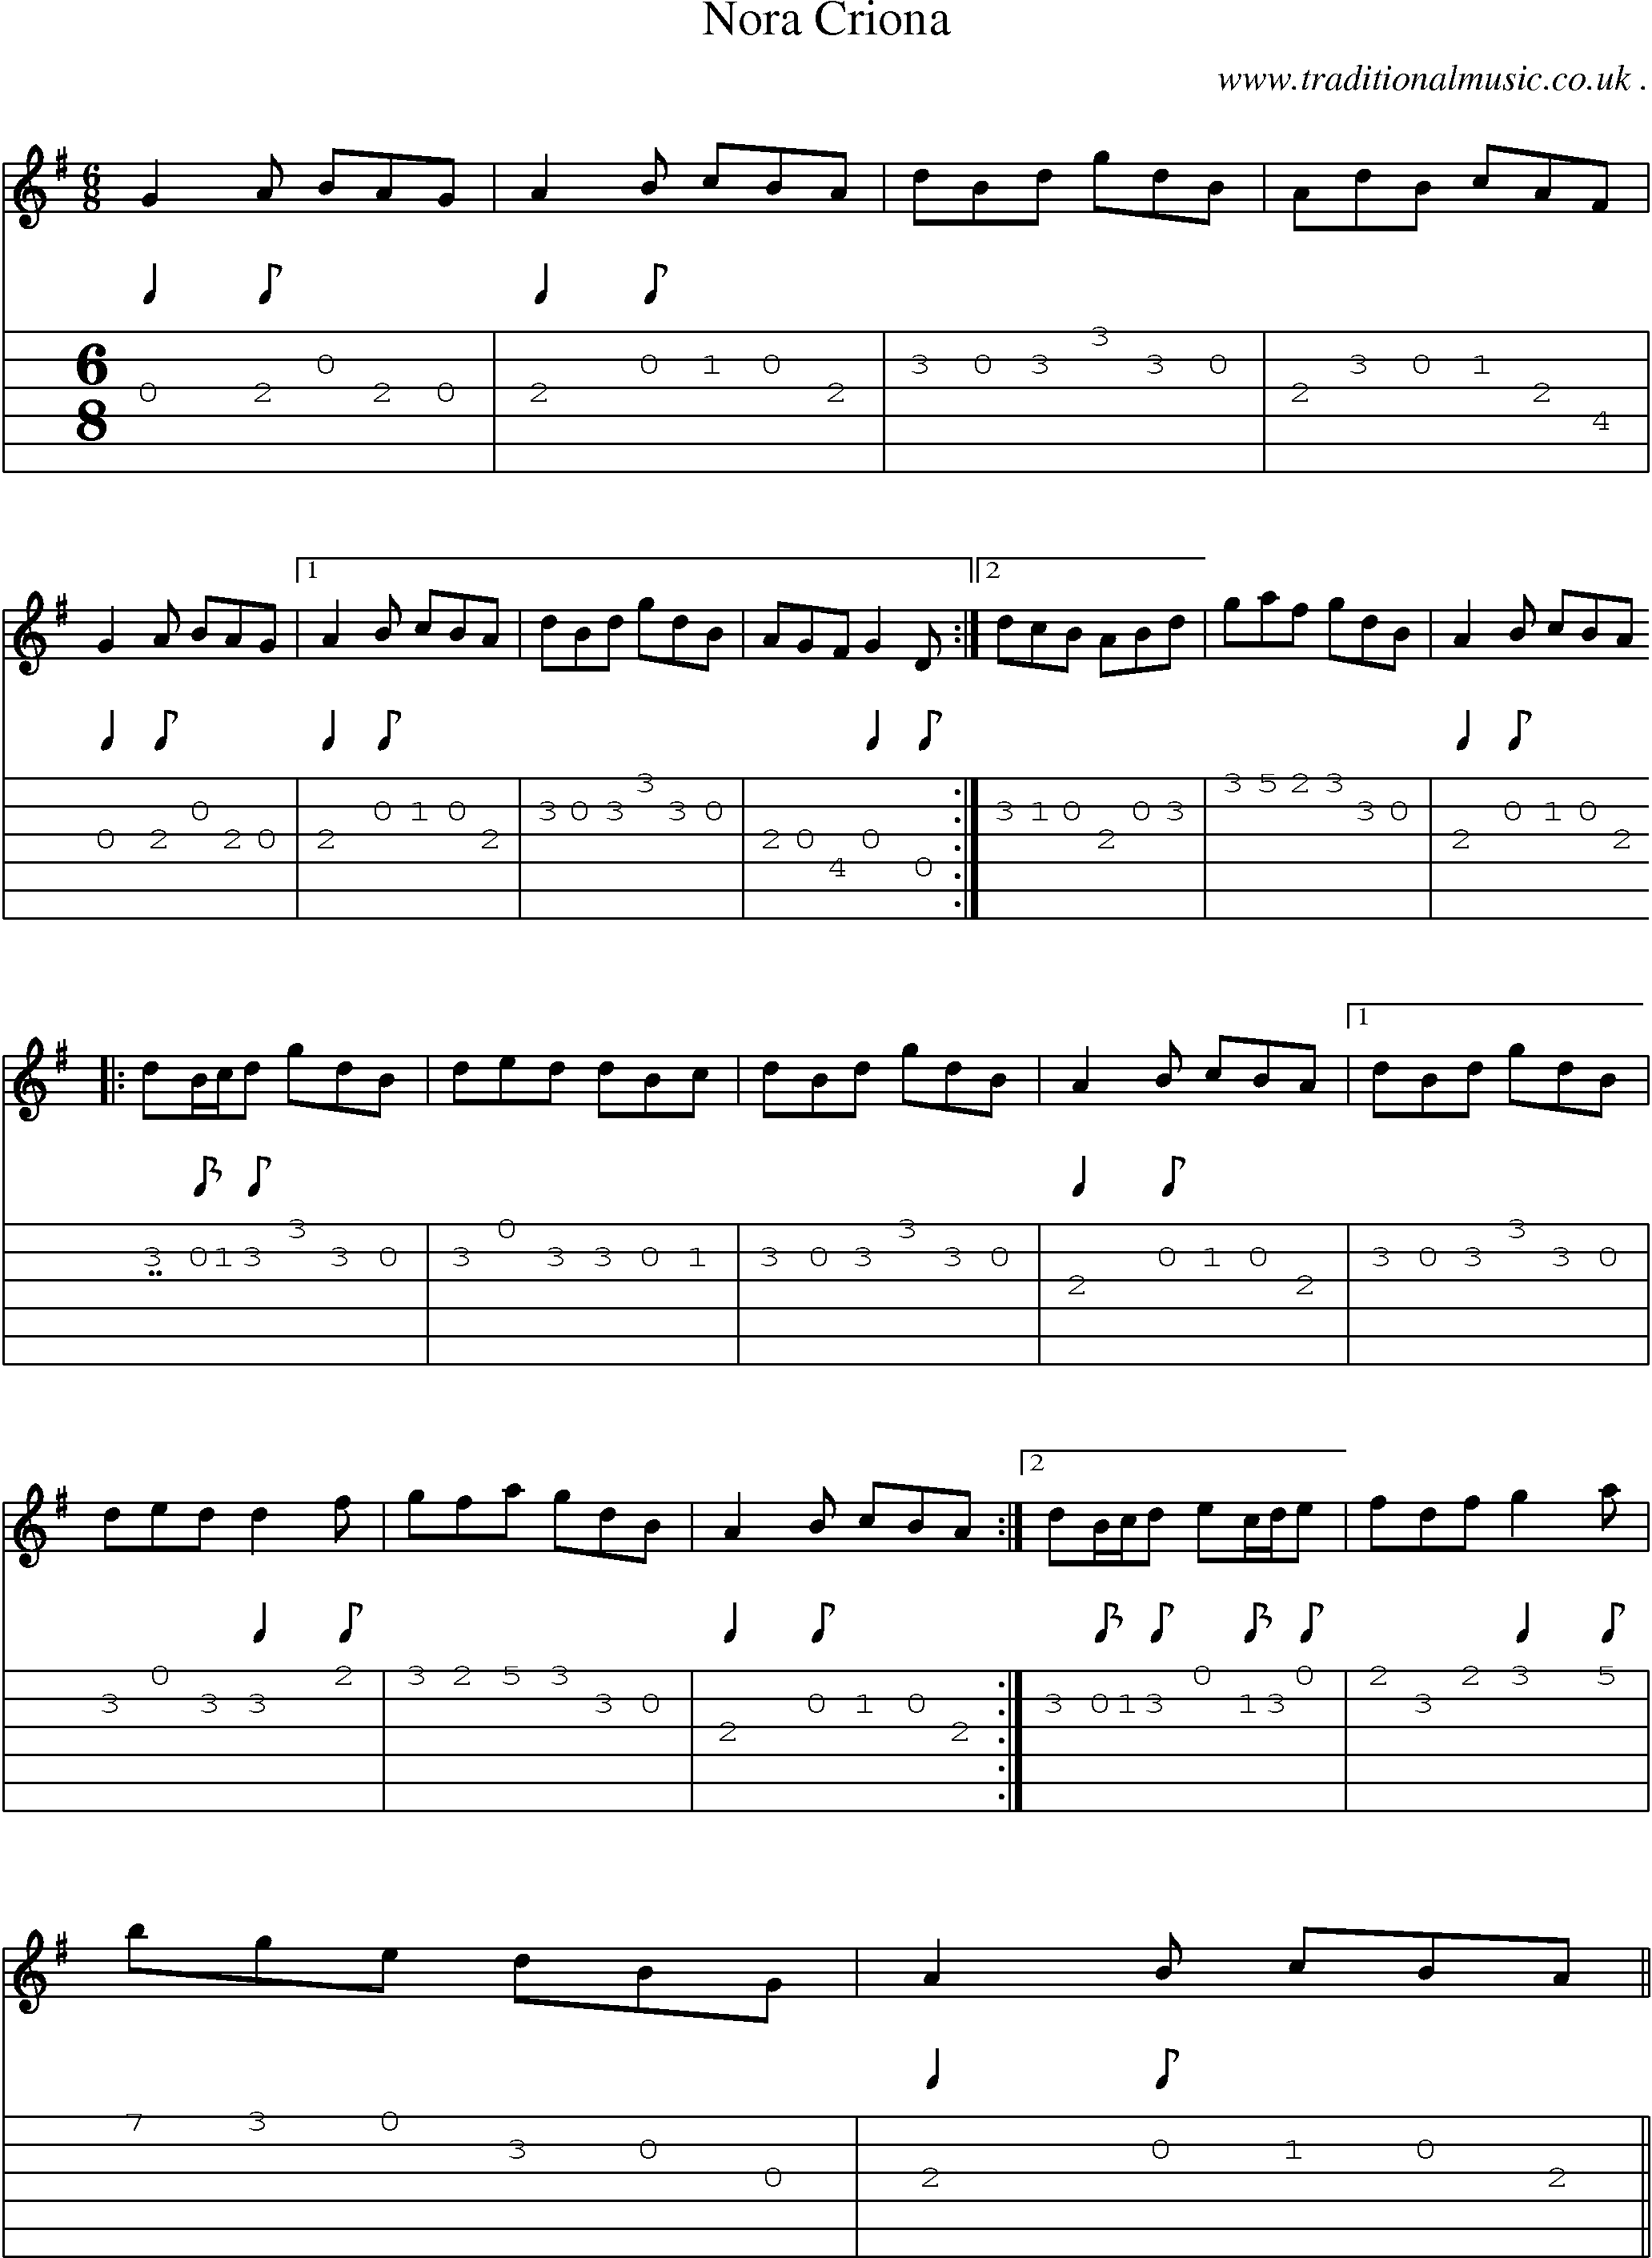 Sheet-Music and Guitar Tabs for Nora Criona